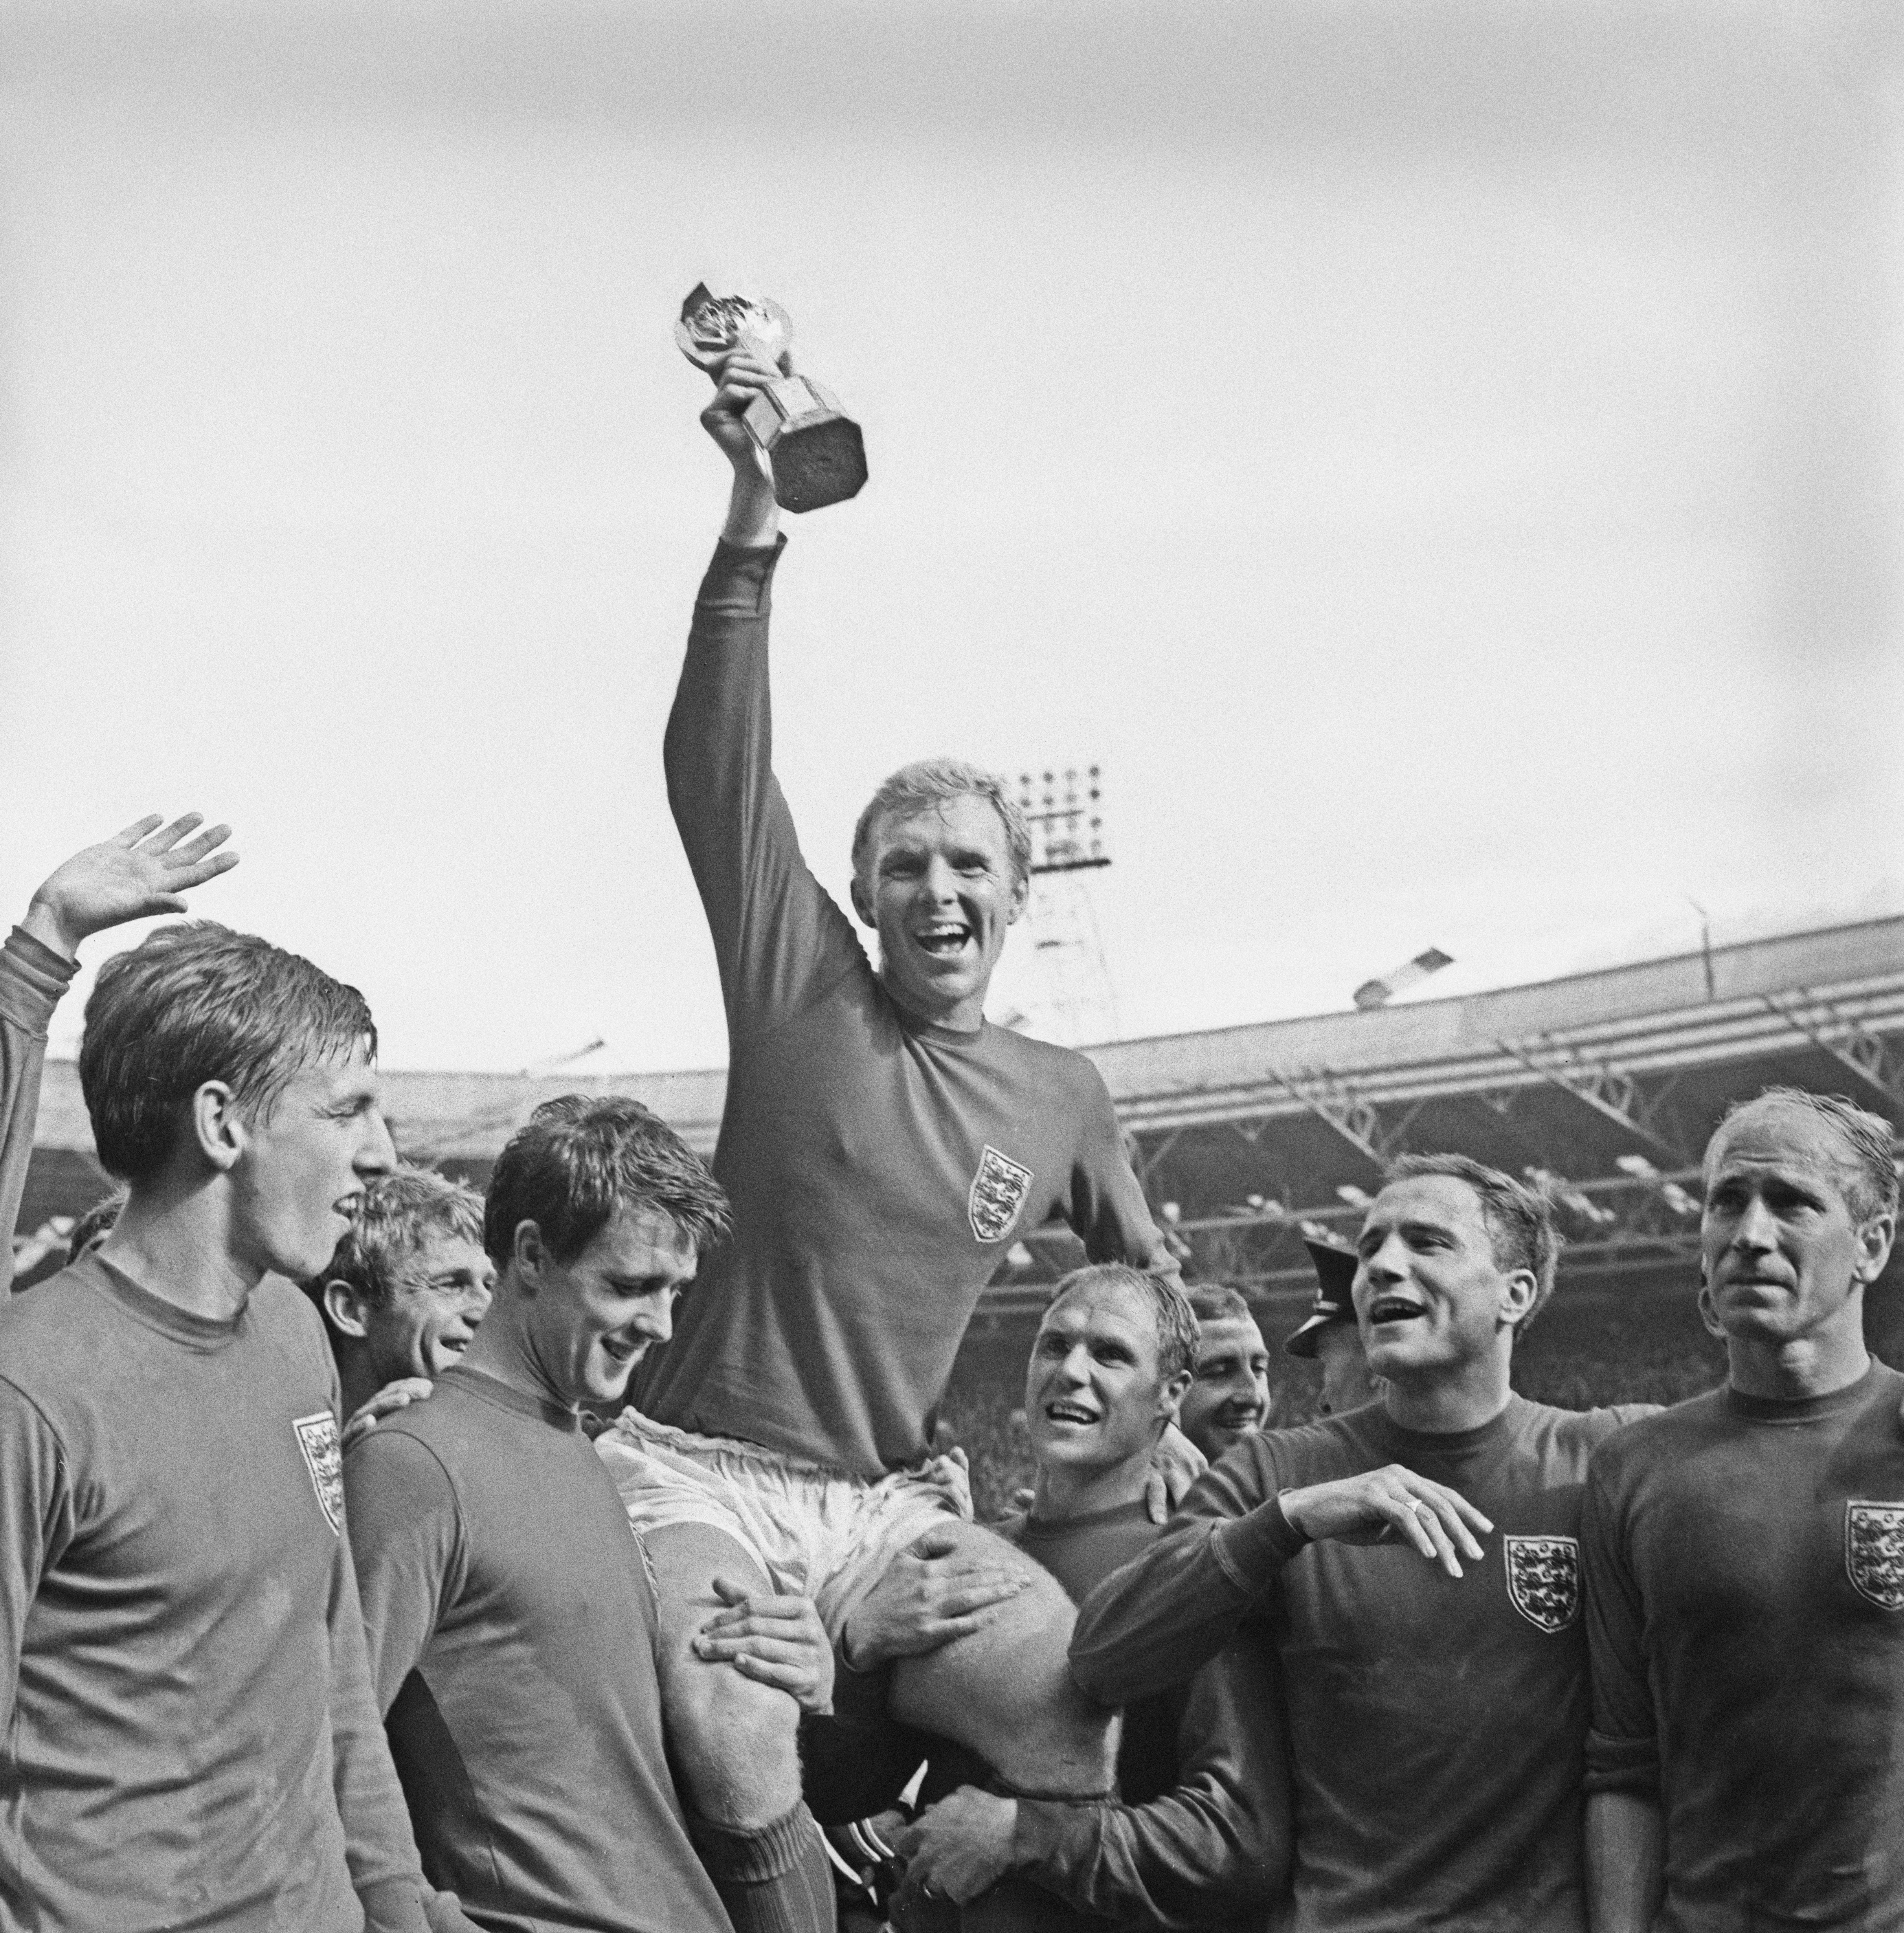 England winning the 1966 World Cup was the top moment for British football fans